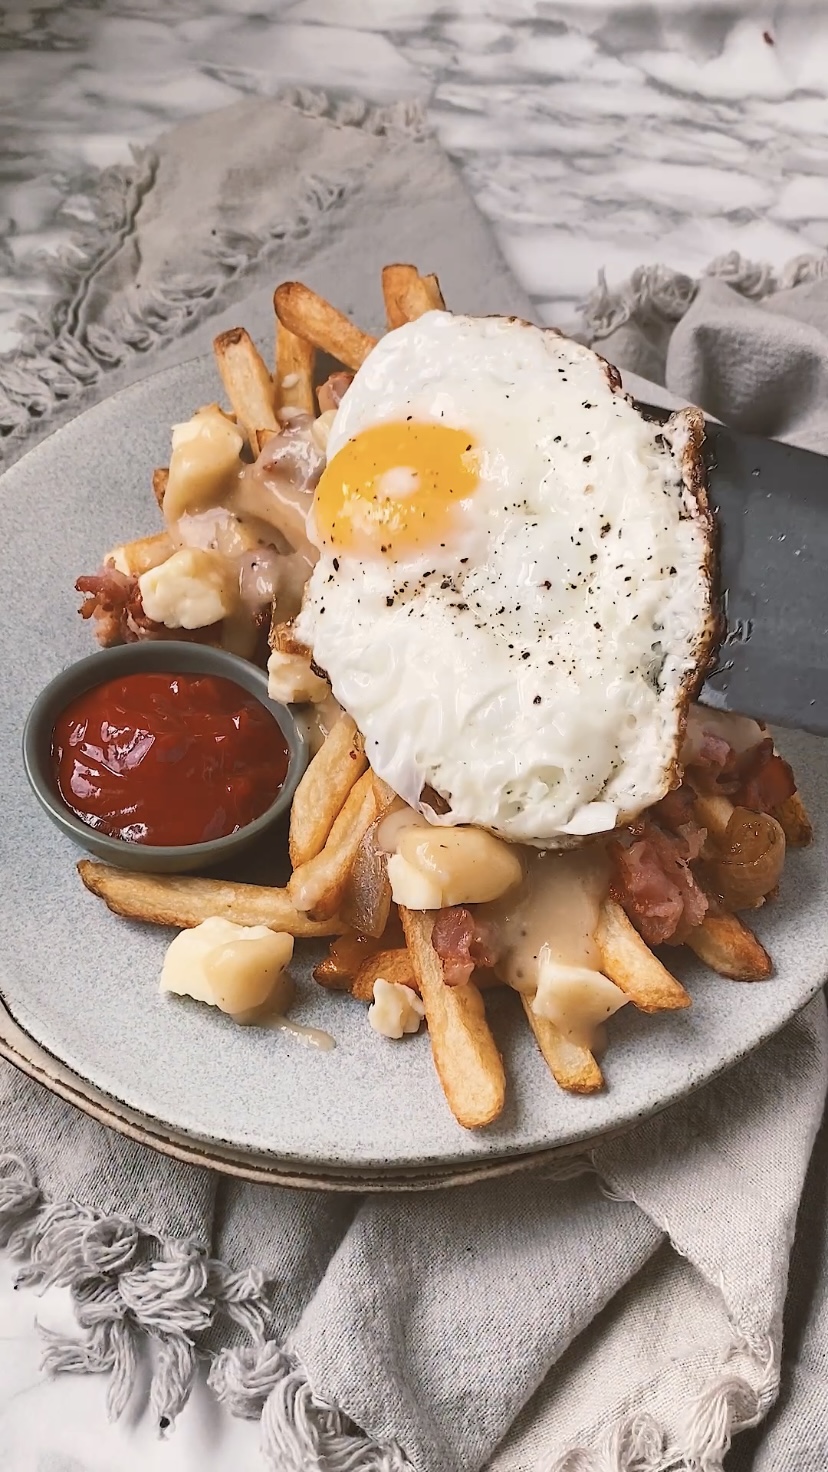 Adding an egg to fries topped with cheese curds, gravy, and bacon..